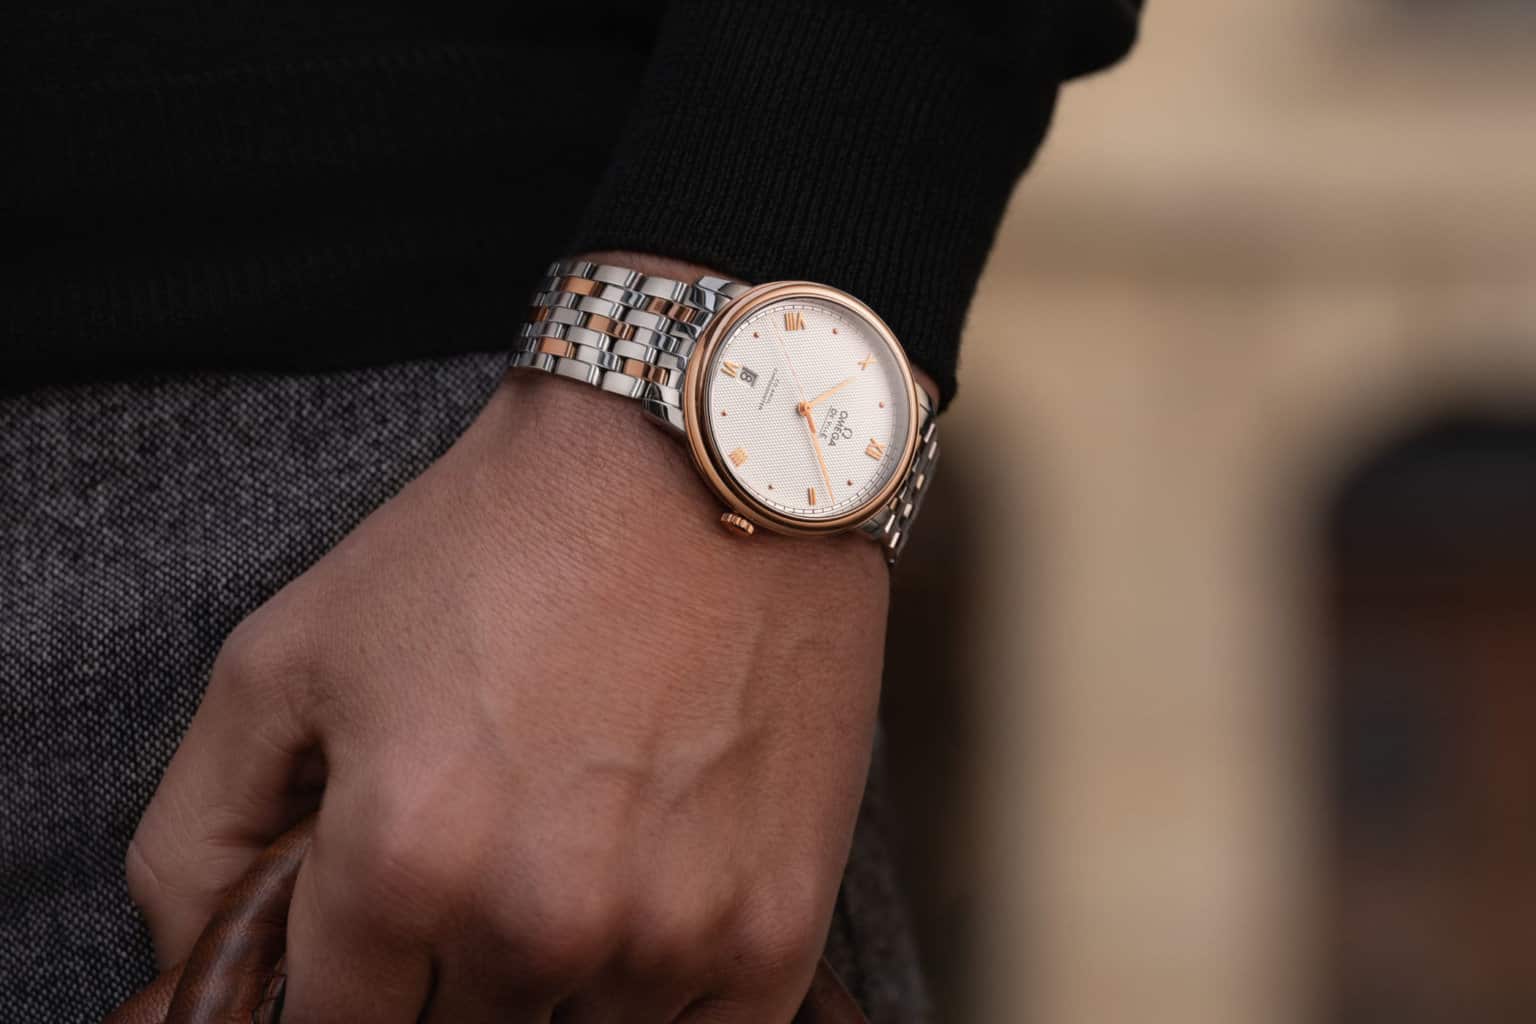 7 Factors to follow before investing in a luxury watch